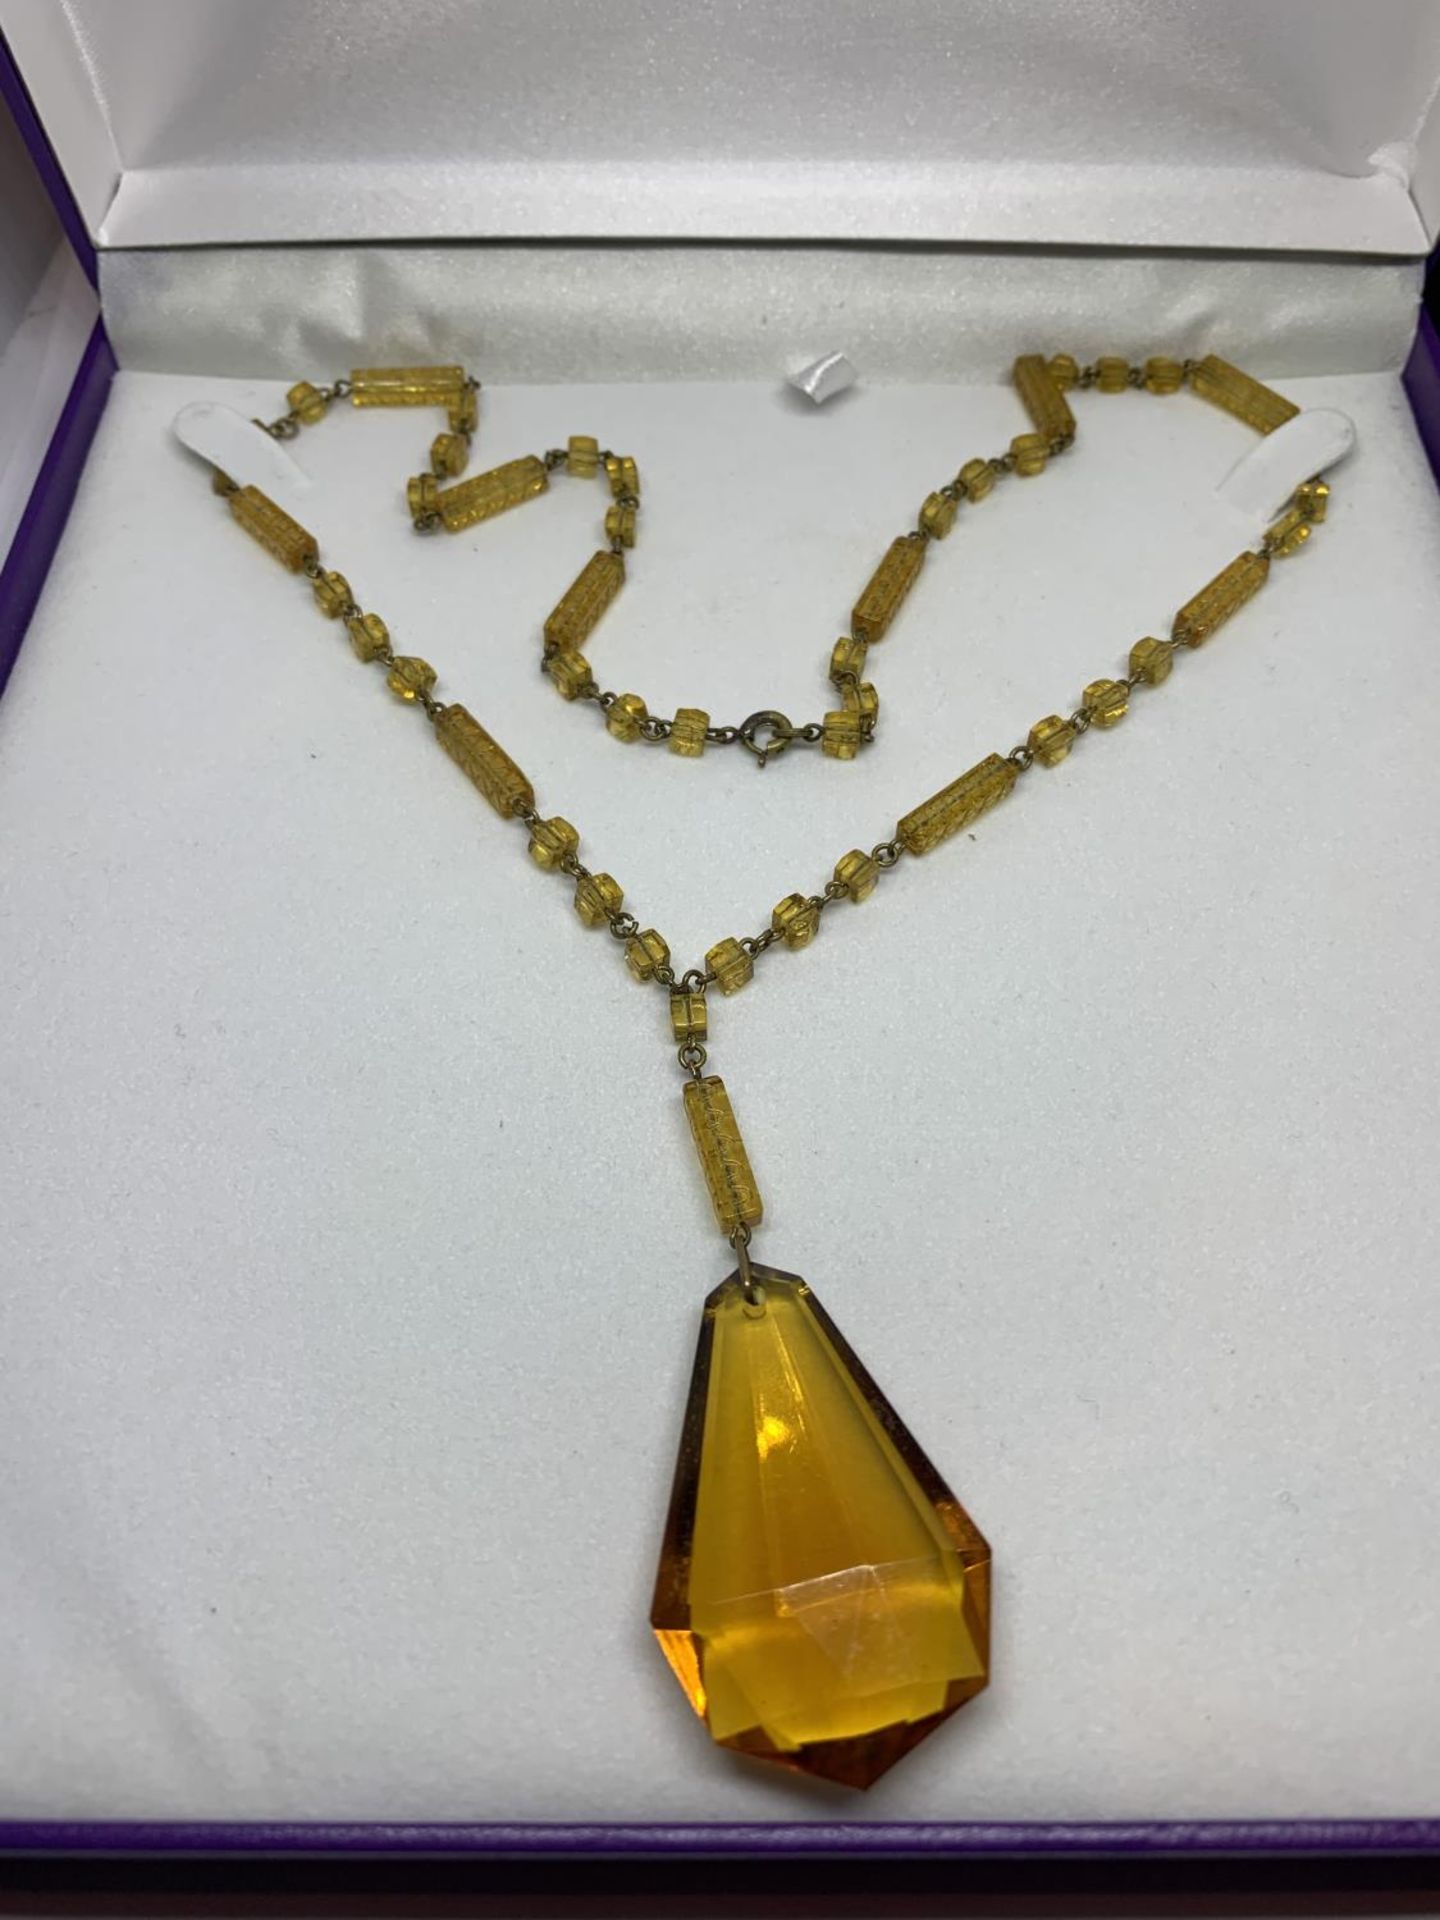 A YELLOW COLOURED NECKLACE IN A PRESENTATION BOX